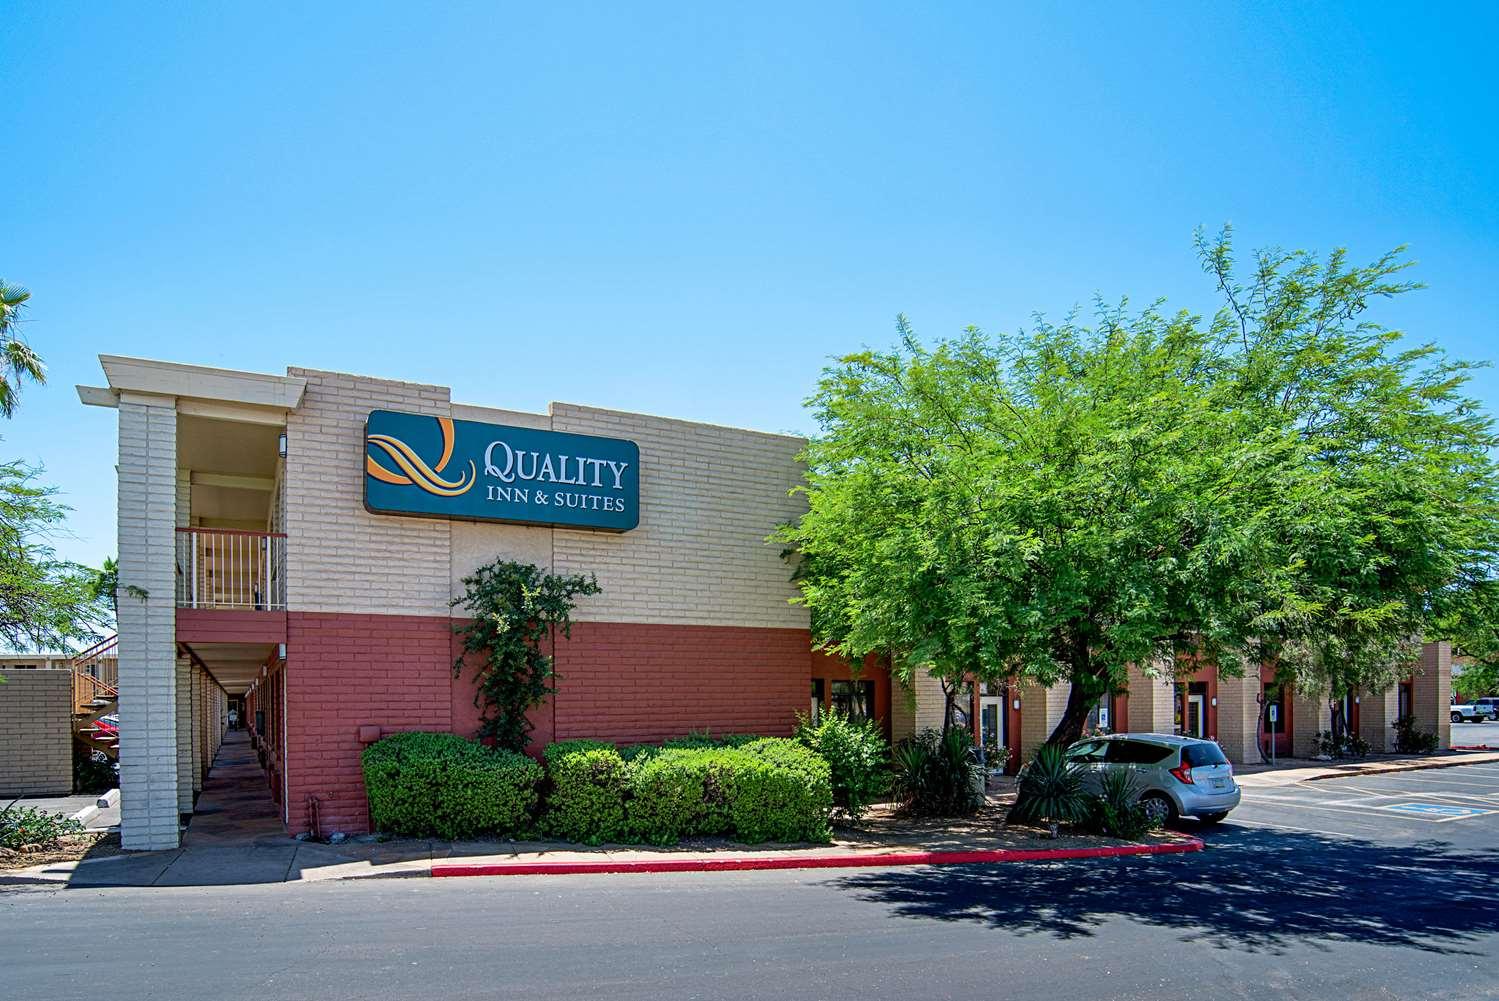 Quality Inn and Suites Phoenix NW - Sun City in Youngtown, AZ